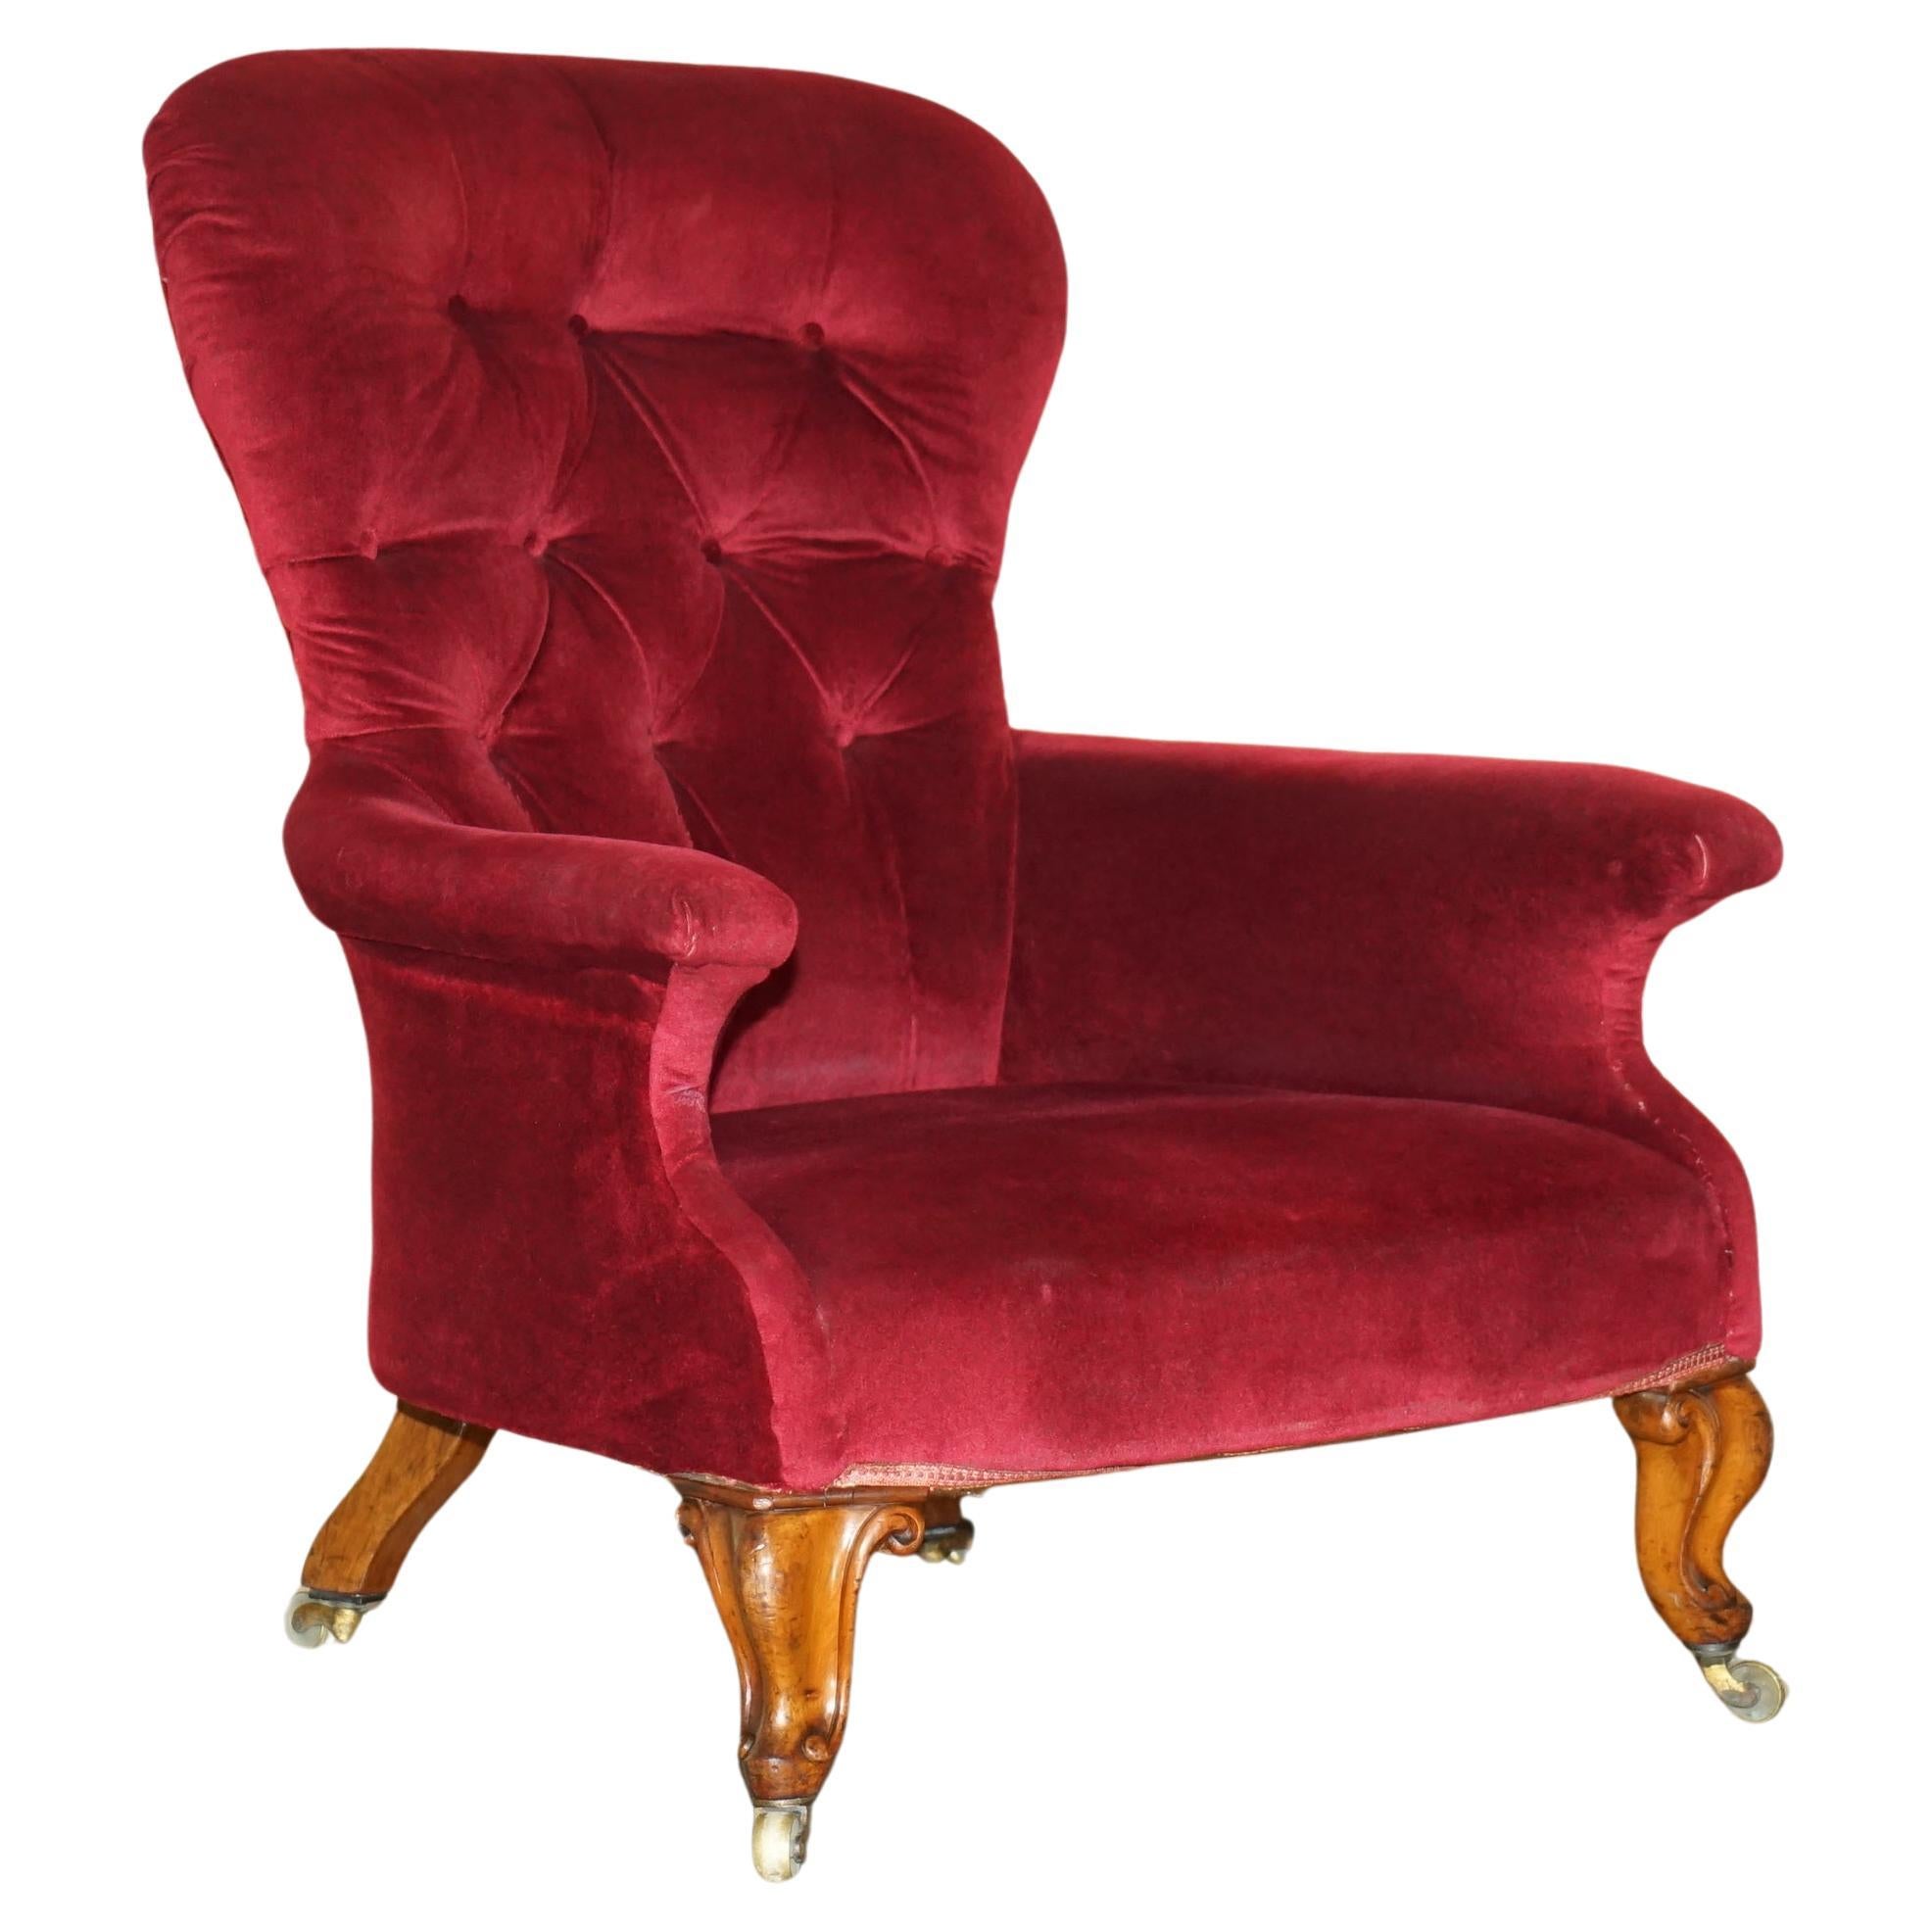 EXQUISITE ANTIQUE WILLIAM IV 1830 CHESTERFIELD TUFTED WALNUT LIBRARY ARMCHAiR For Sale